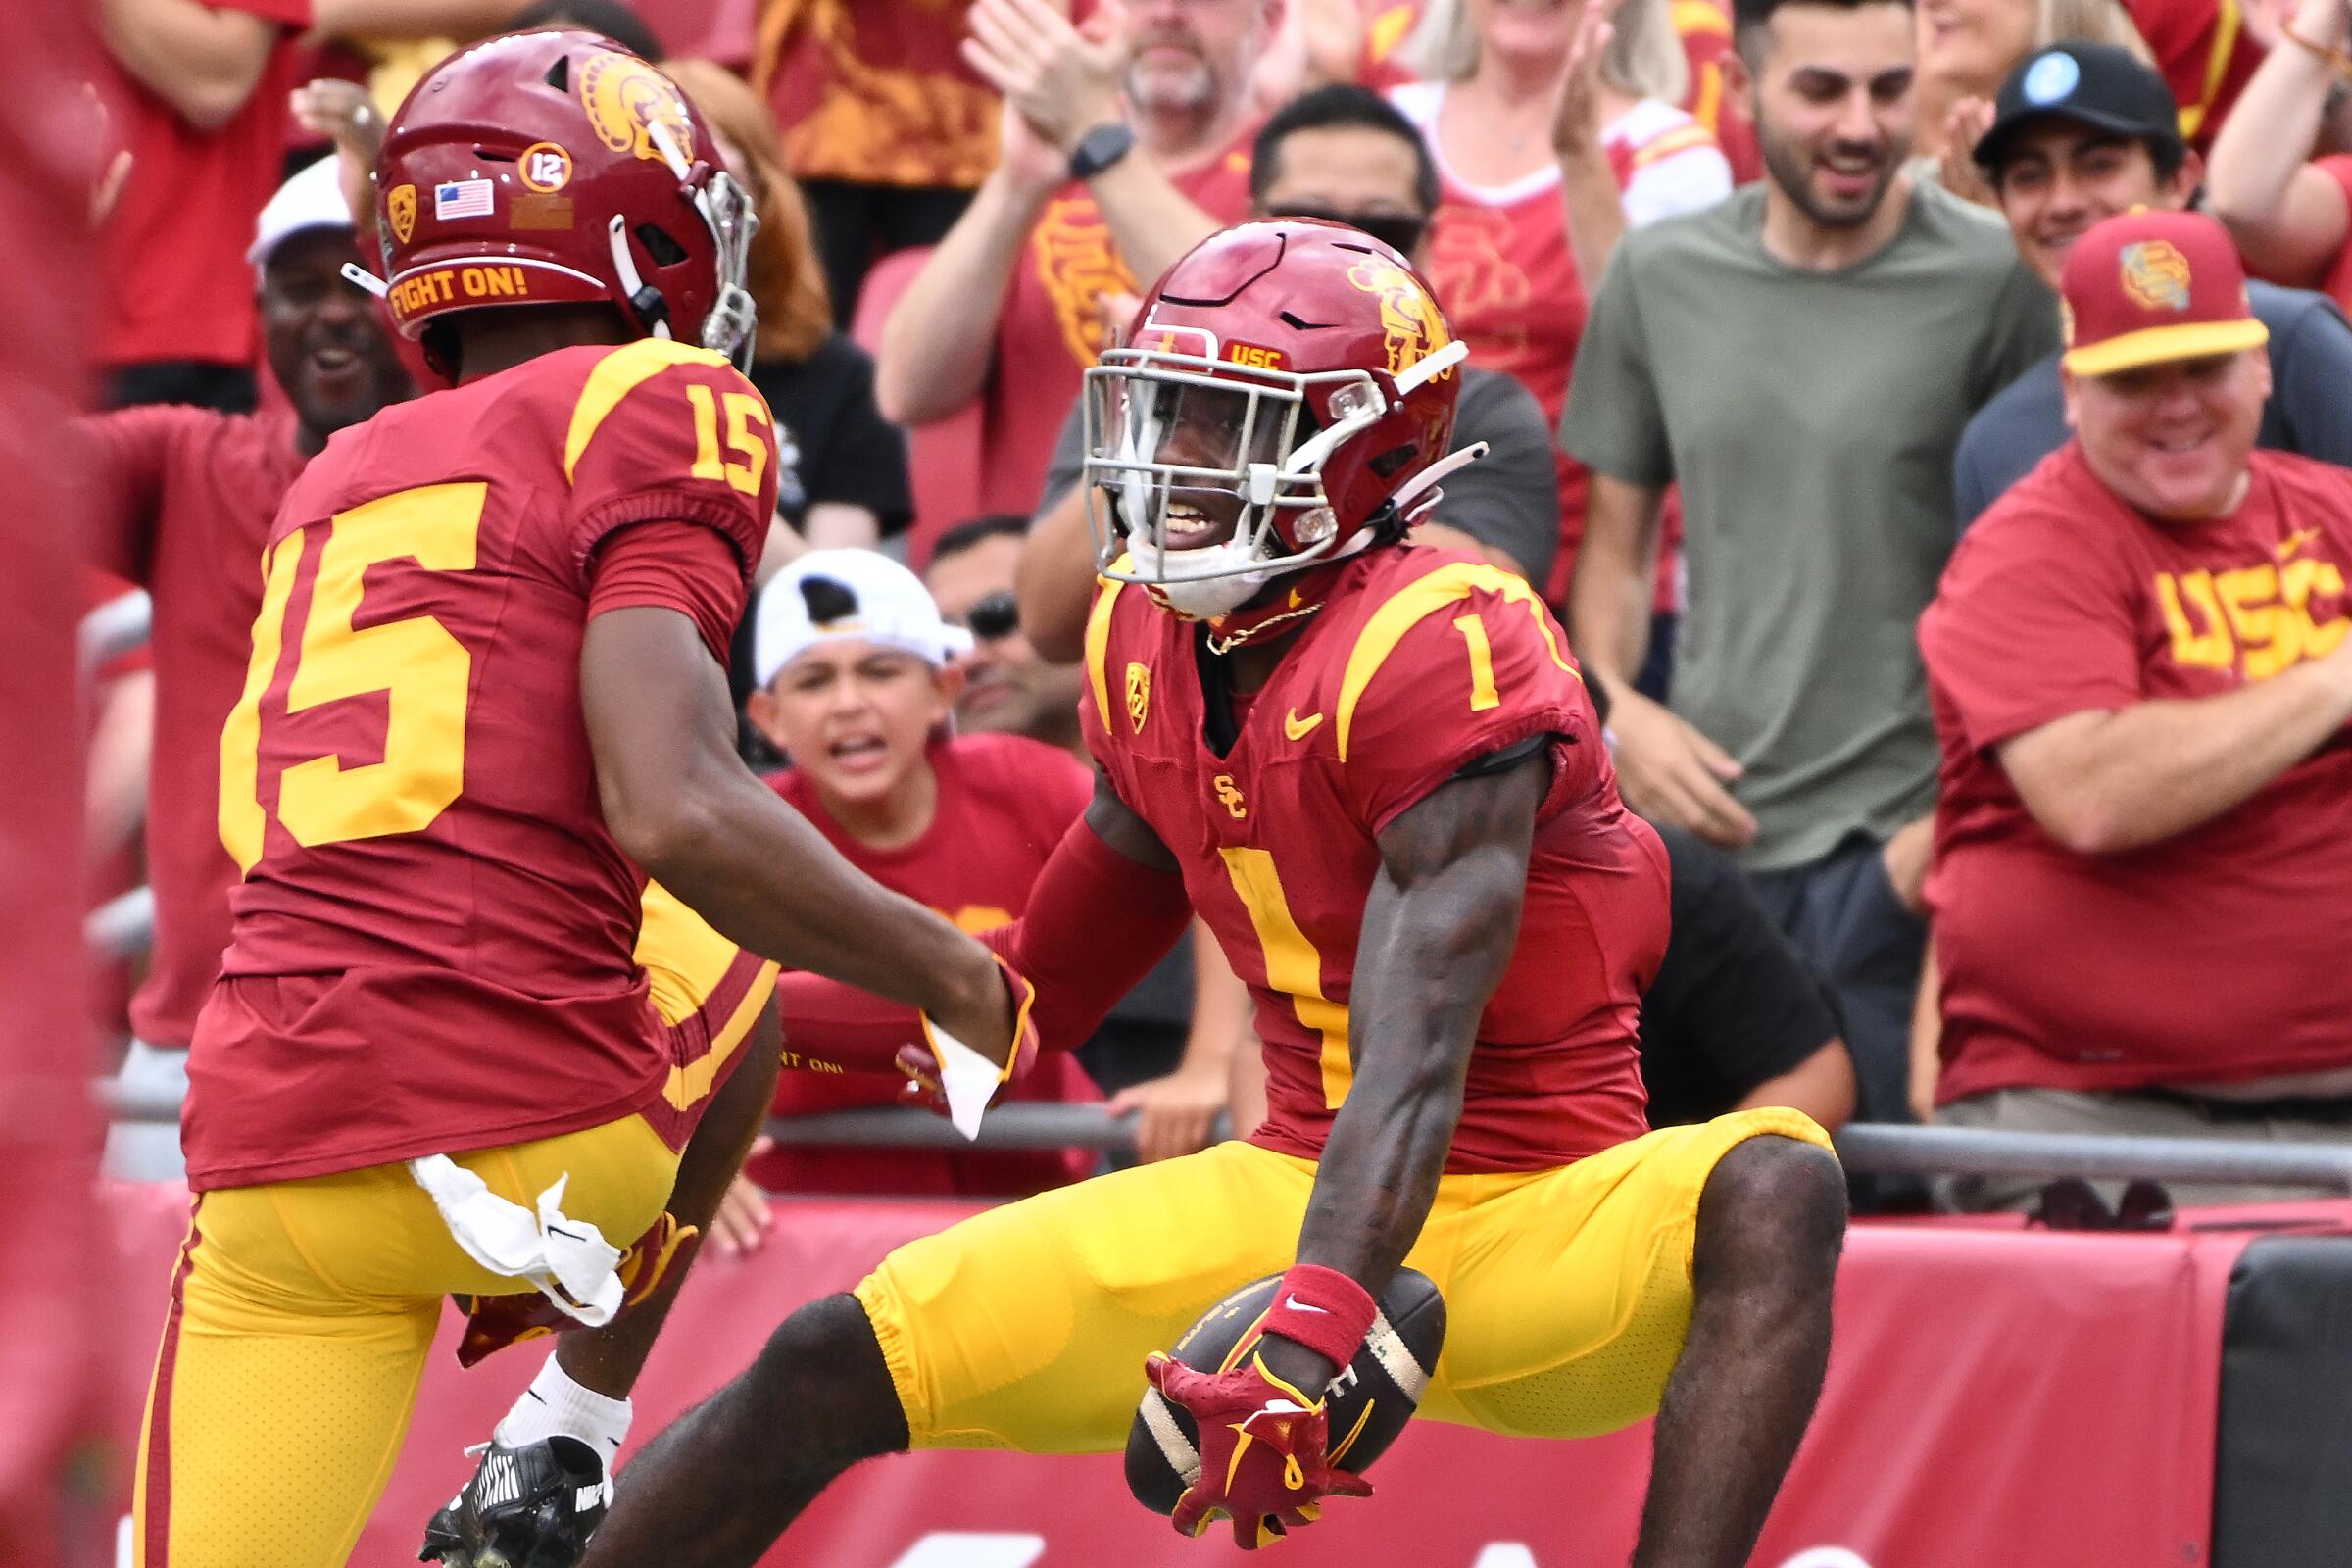 USC wide receiver Zachariah Branch celebrates with teammate Dorian Singer after making a touchdown catch.